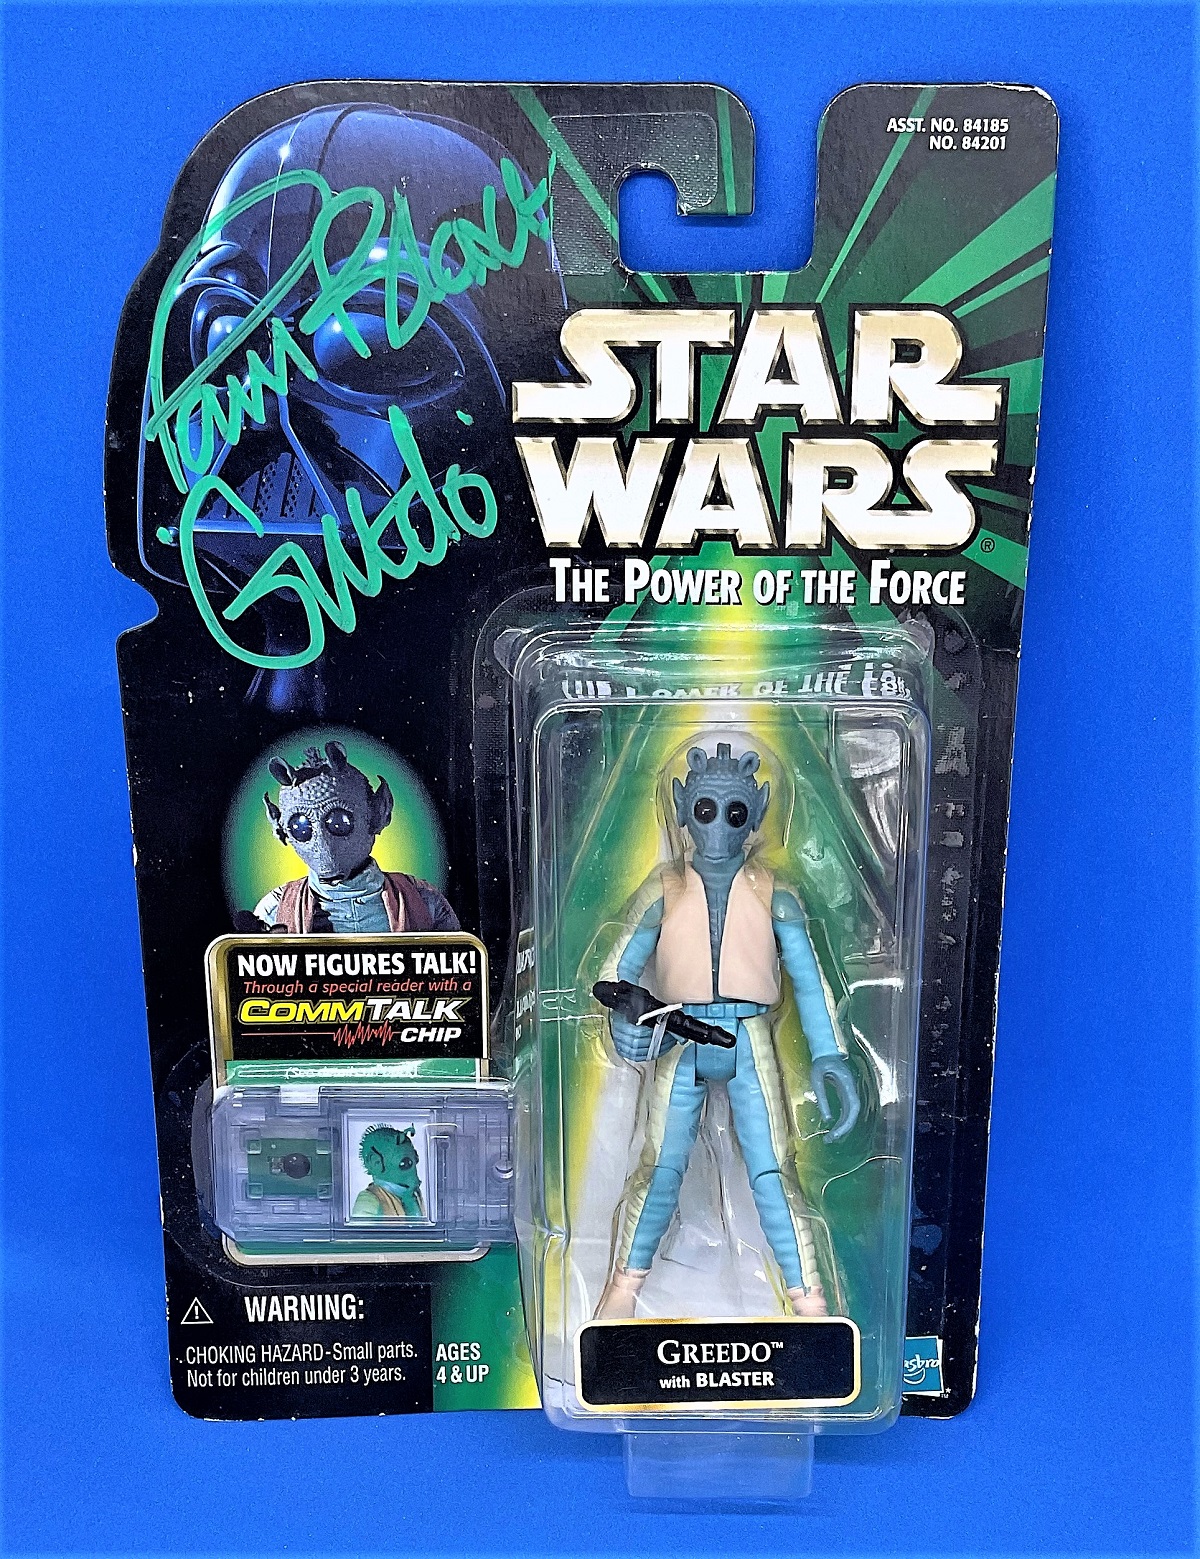 Star Wars, Paul Blake signed miniature action figure of Greedo. This item is still complete in its